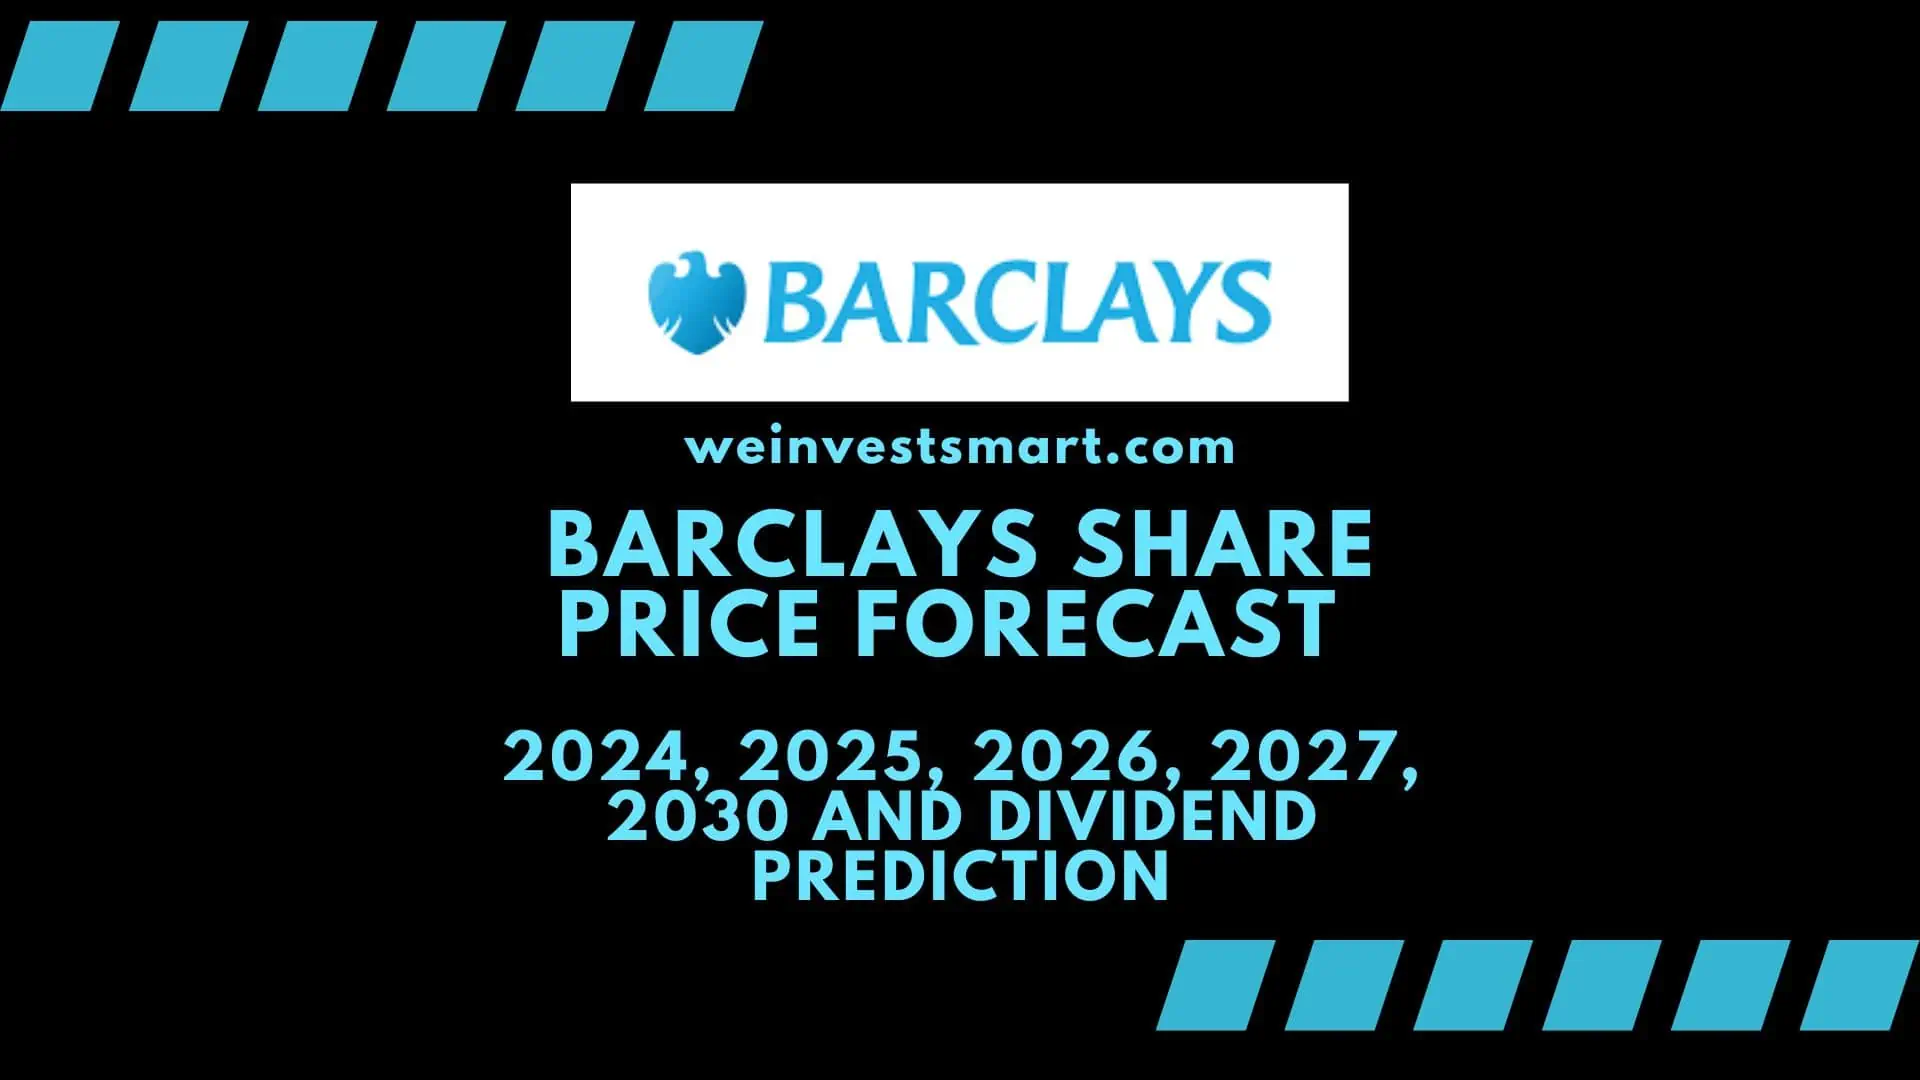 Barclays Share Price Forecast 2024, 2025, 2026, 2027, 2030 and Dividend Prediction